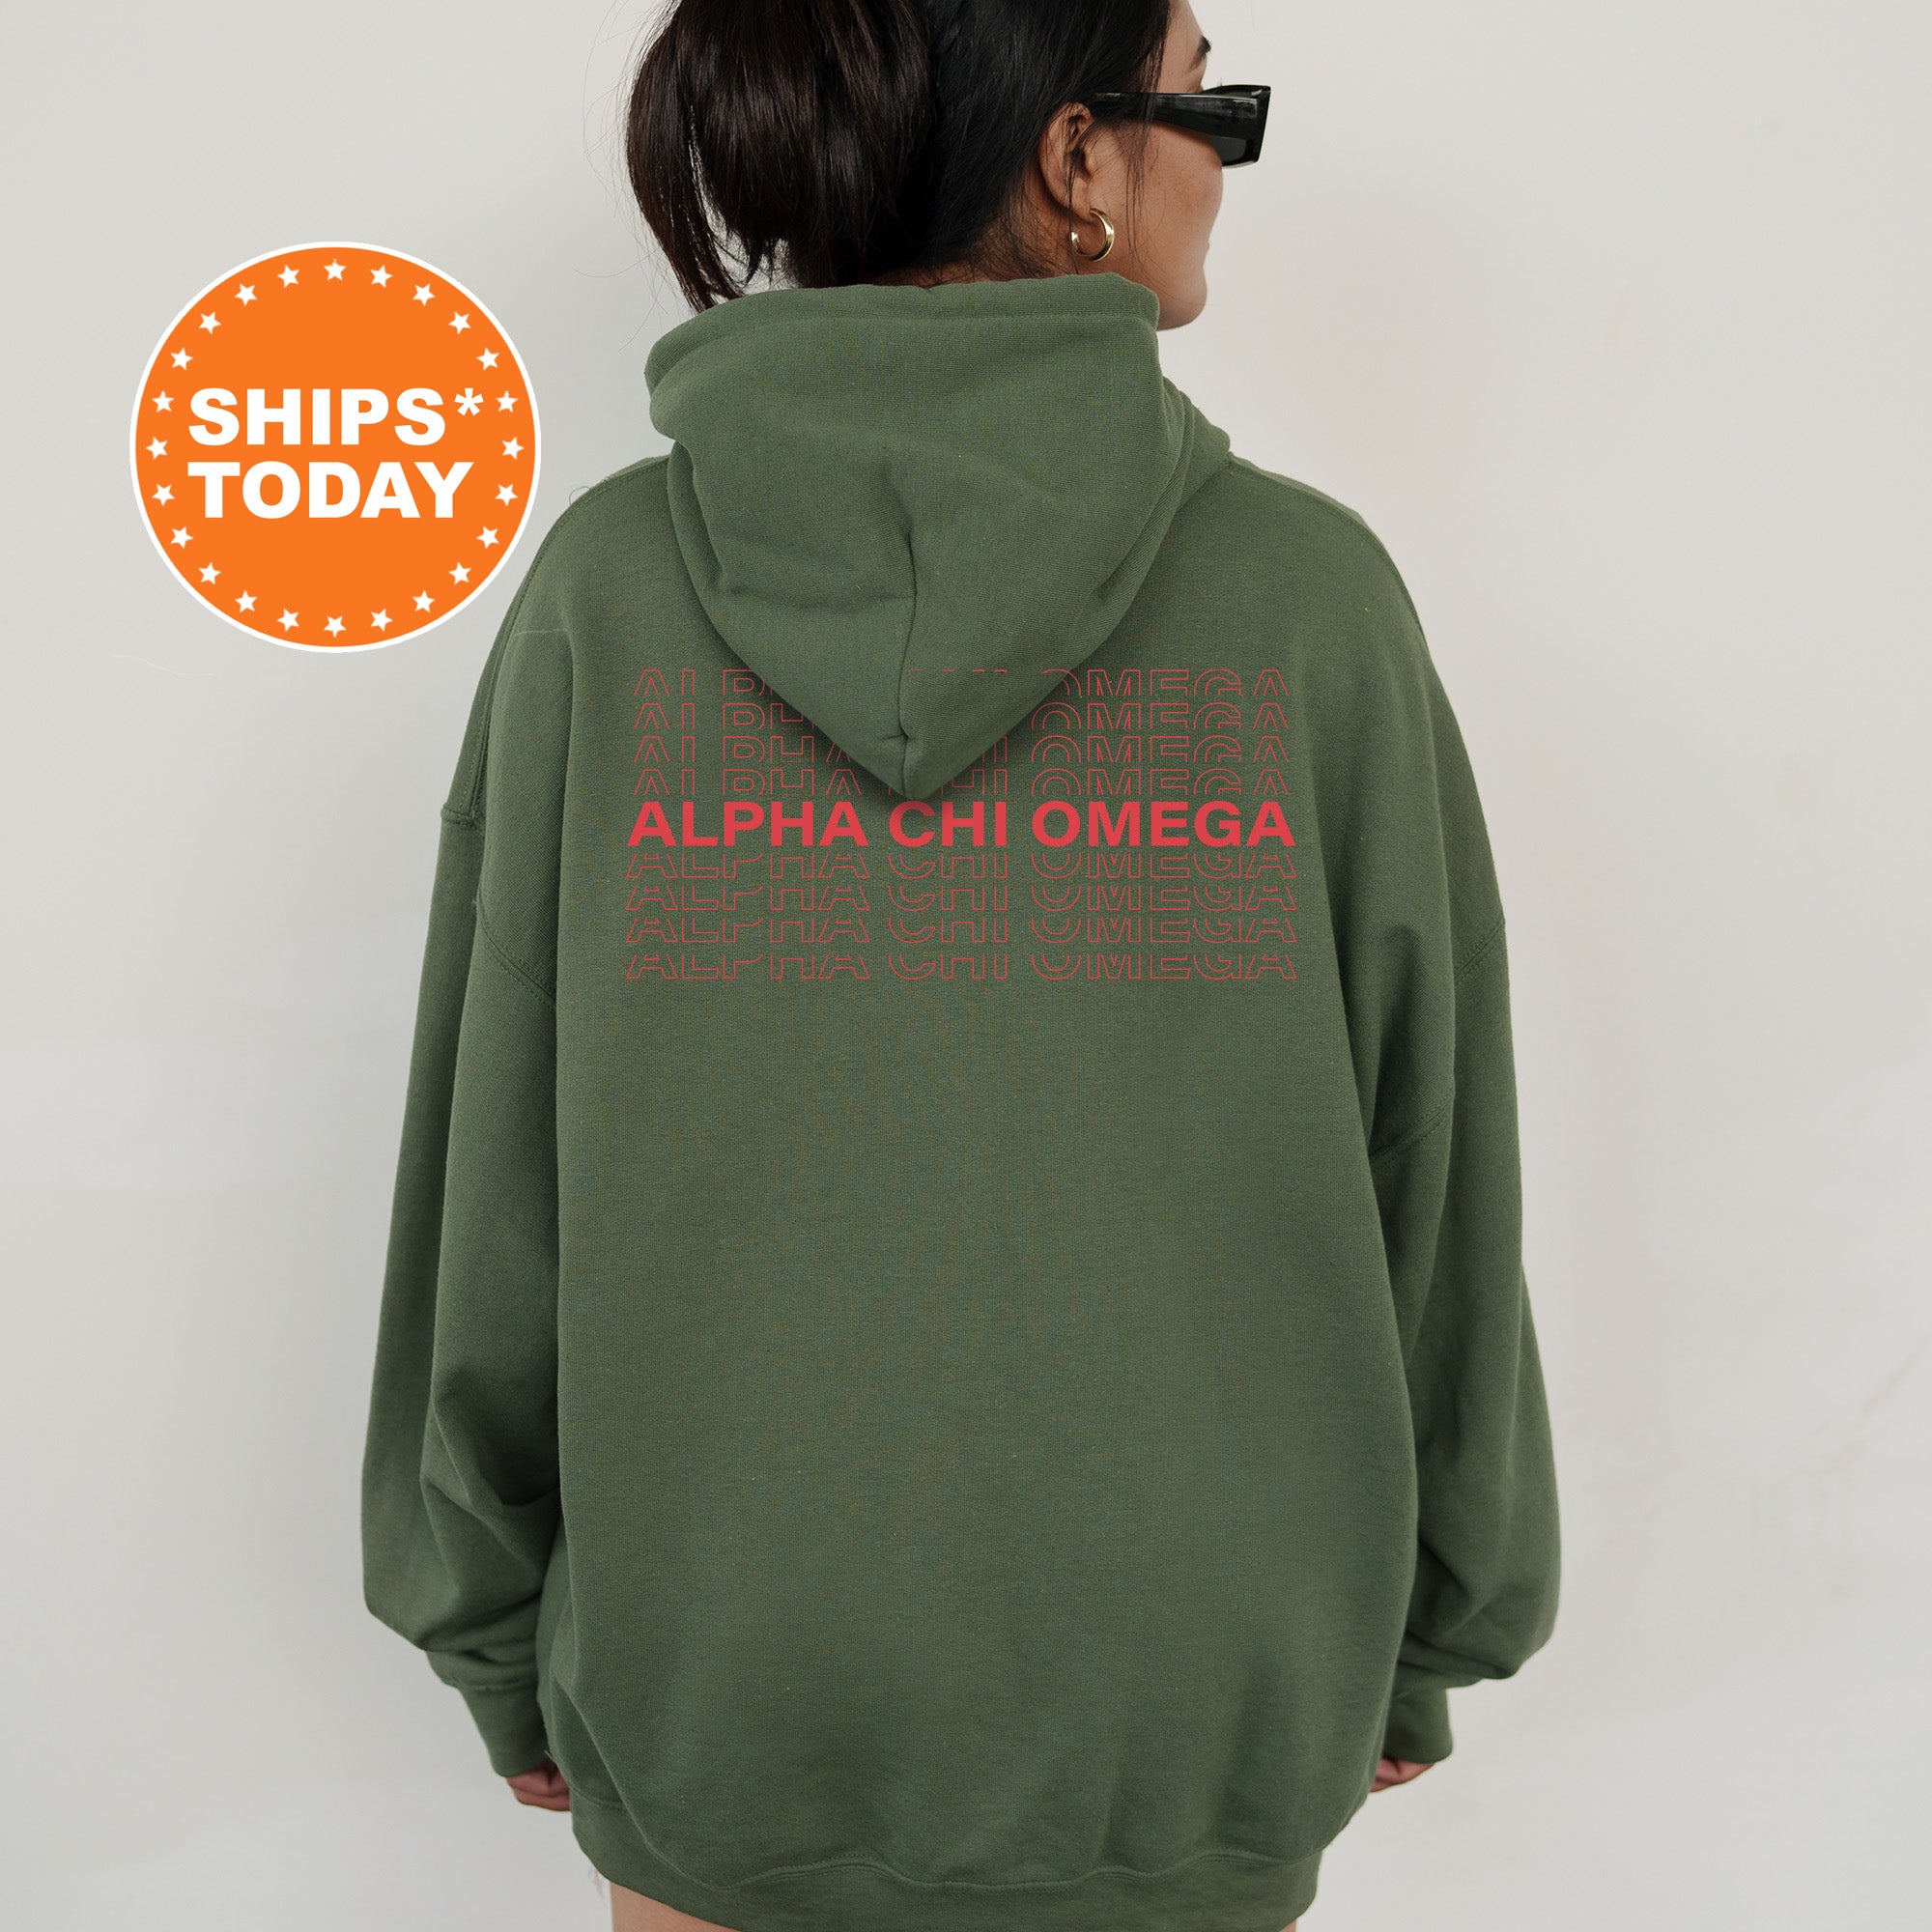 a woman wearing a green hoodie with a red graphic on it